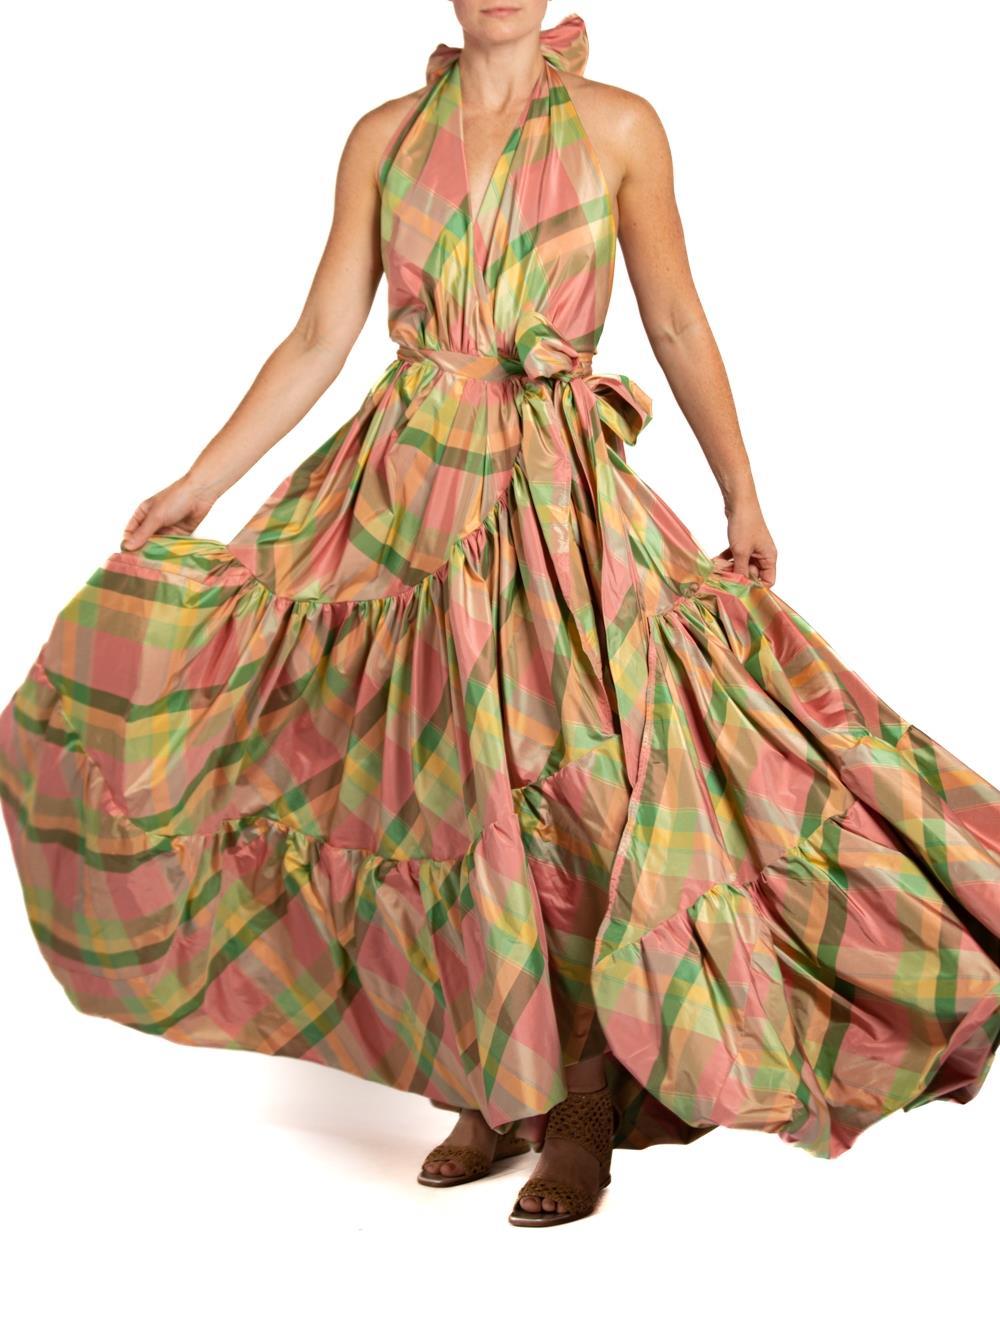 MORPHEW COLLECTION Pink & Green Silk Taffeta Plaid Gown For Sale 5